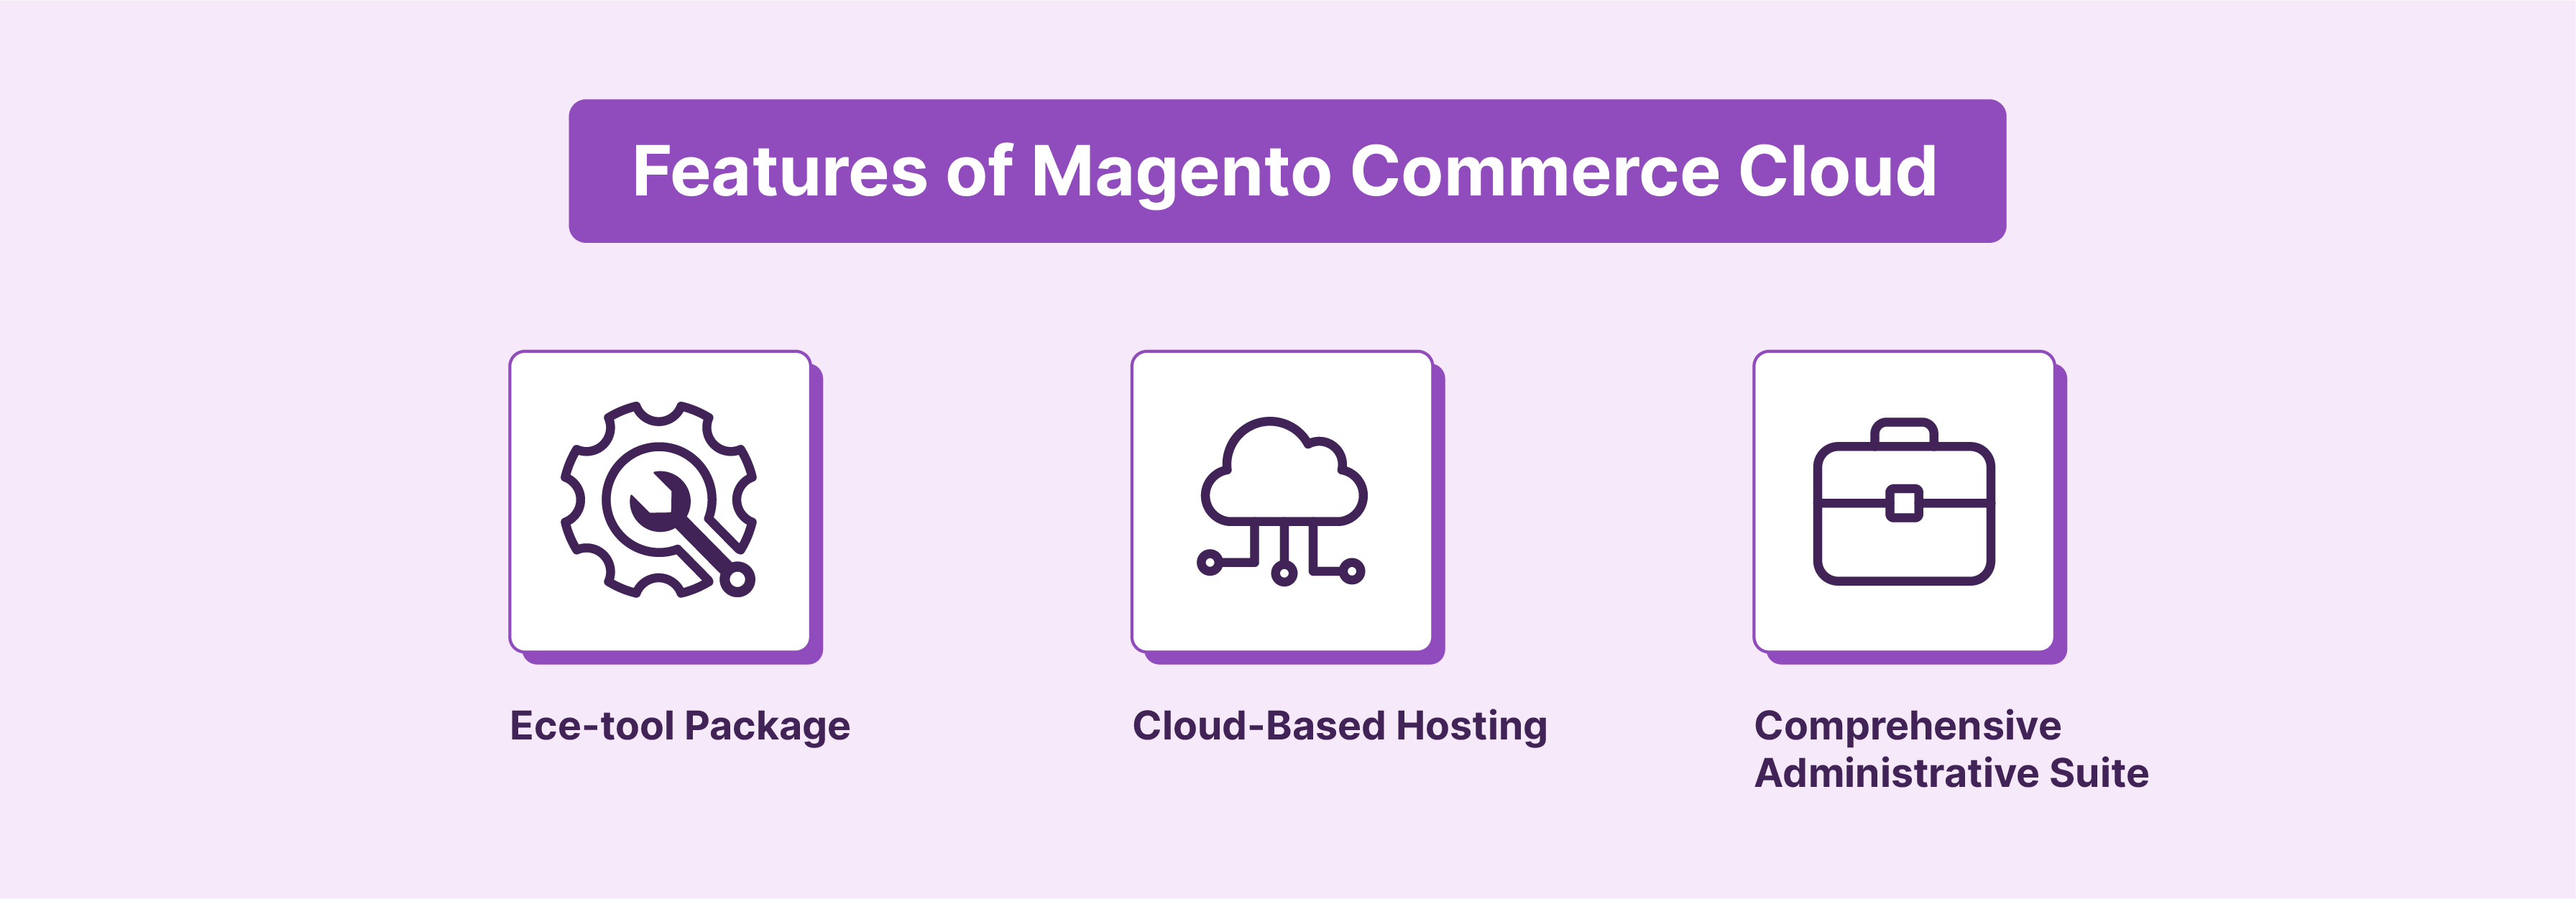 Features of Magento Commerce Cloud.